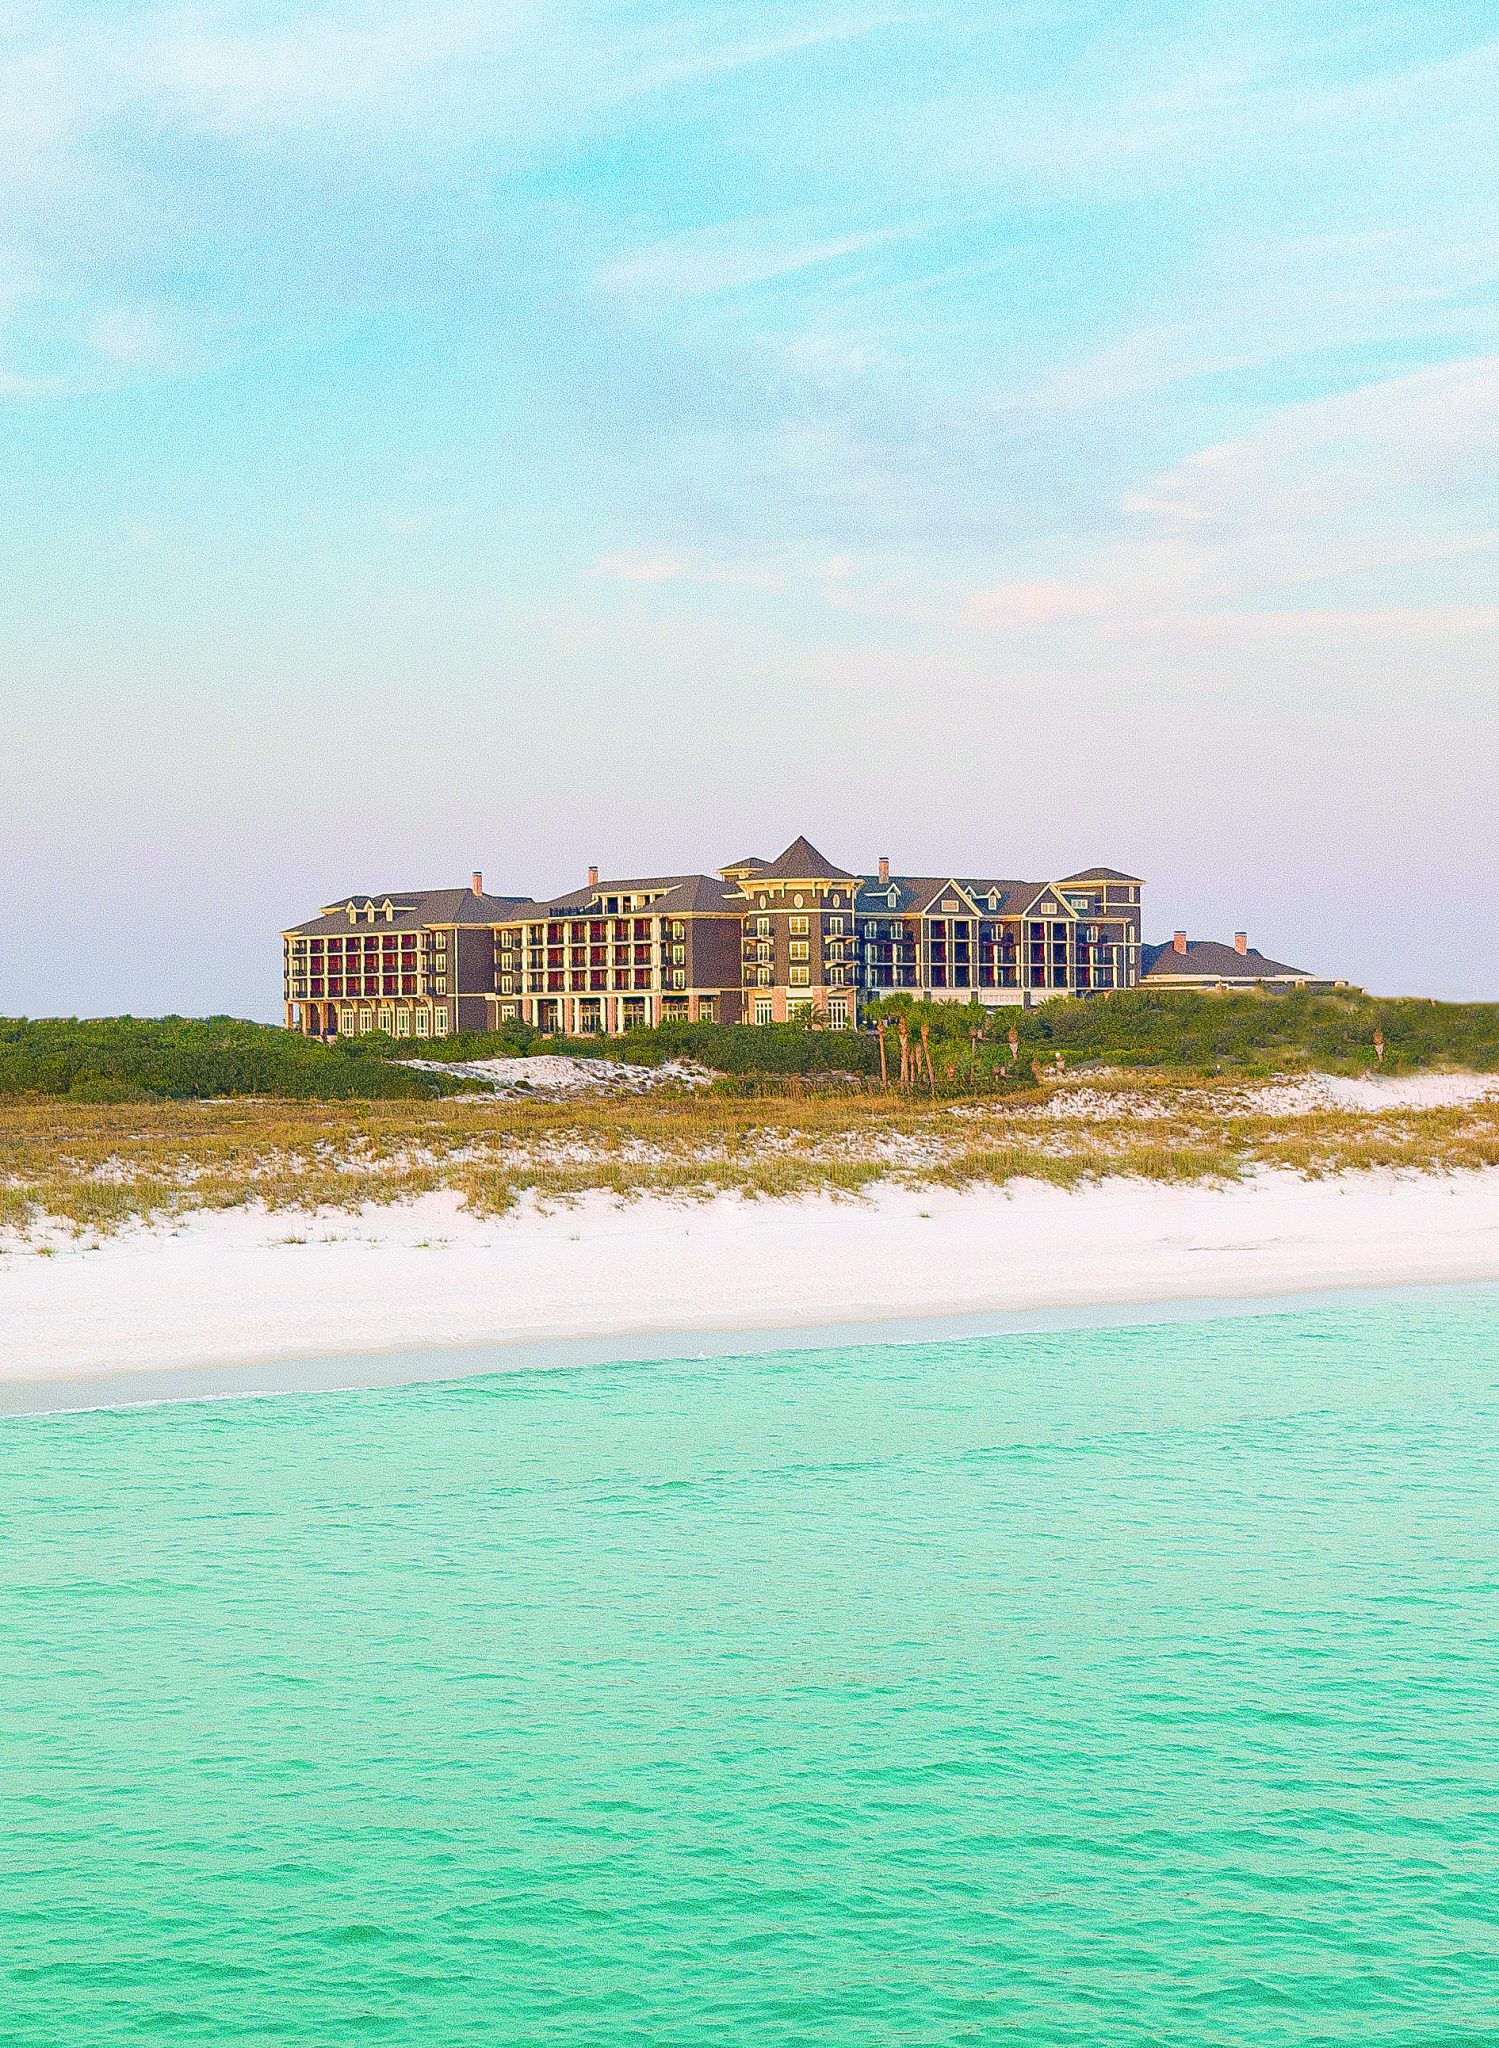 Destin Gets Lucky With New Luxury Resort